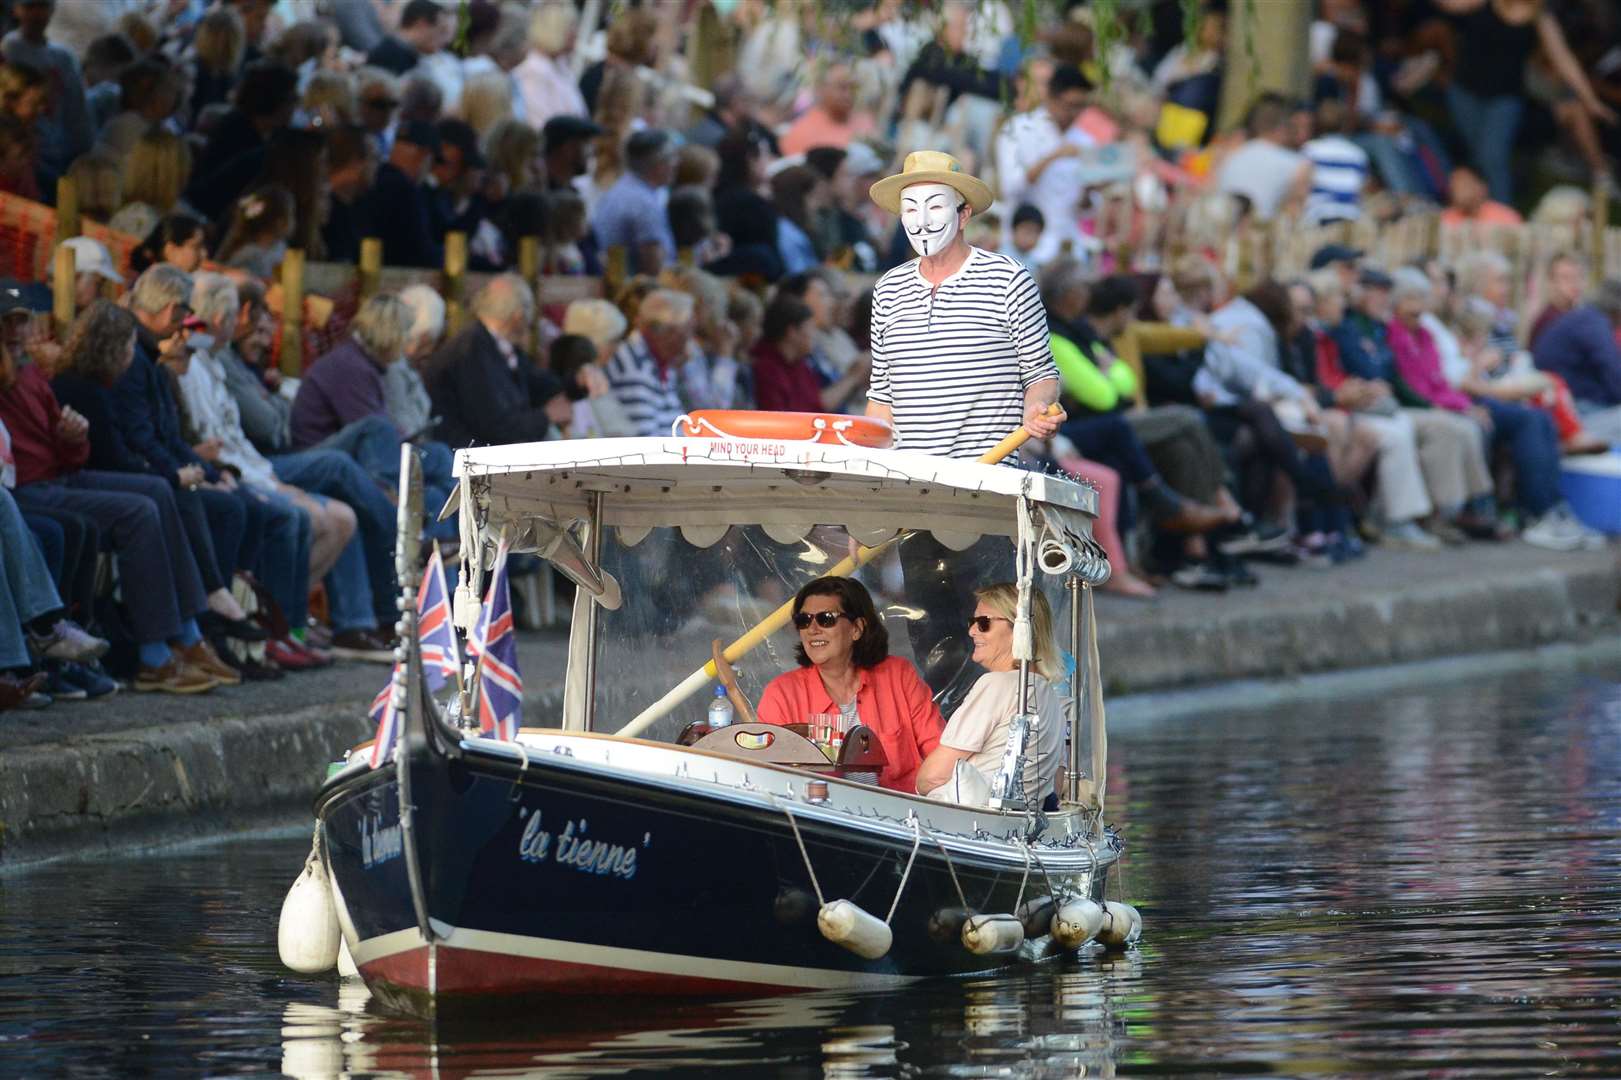 The fete brings crowds to the canal for two displays, one in the daytime and one in the evening. Picture: Gary Browne